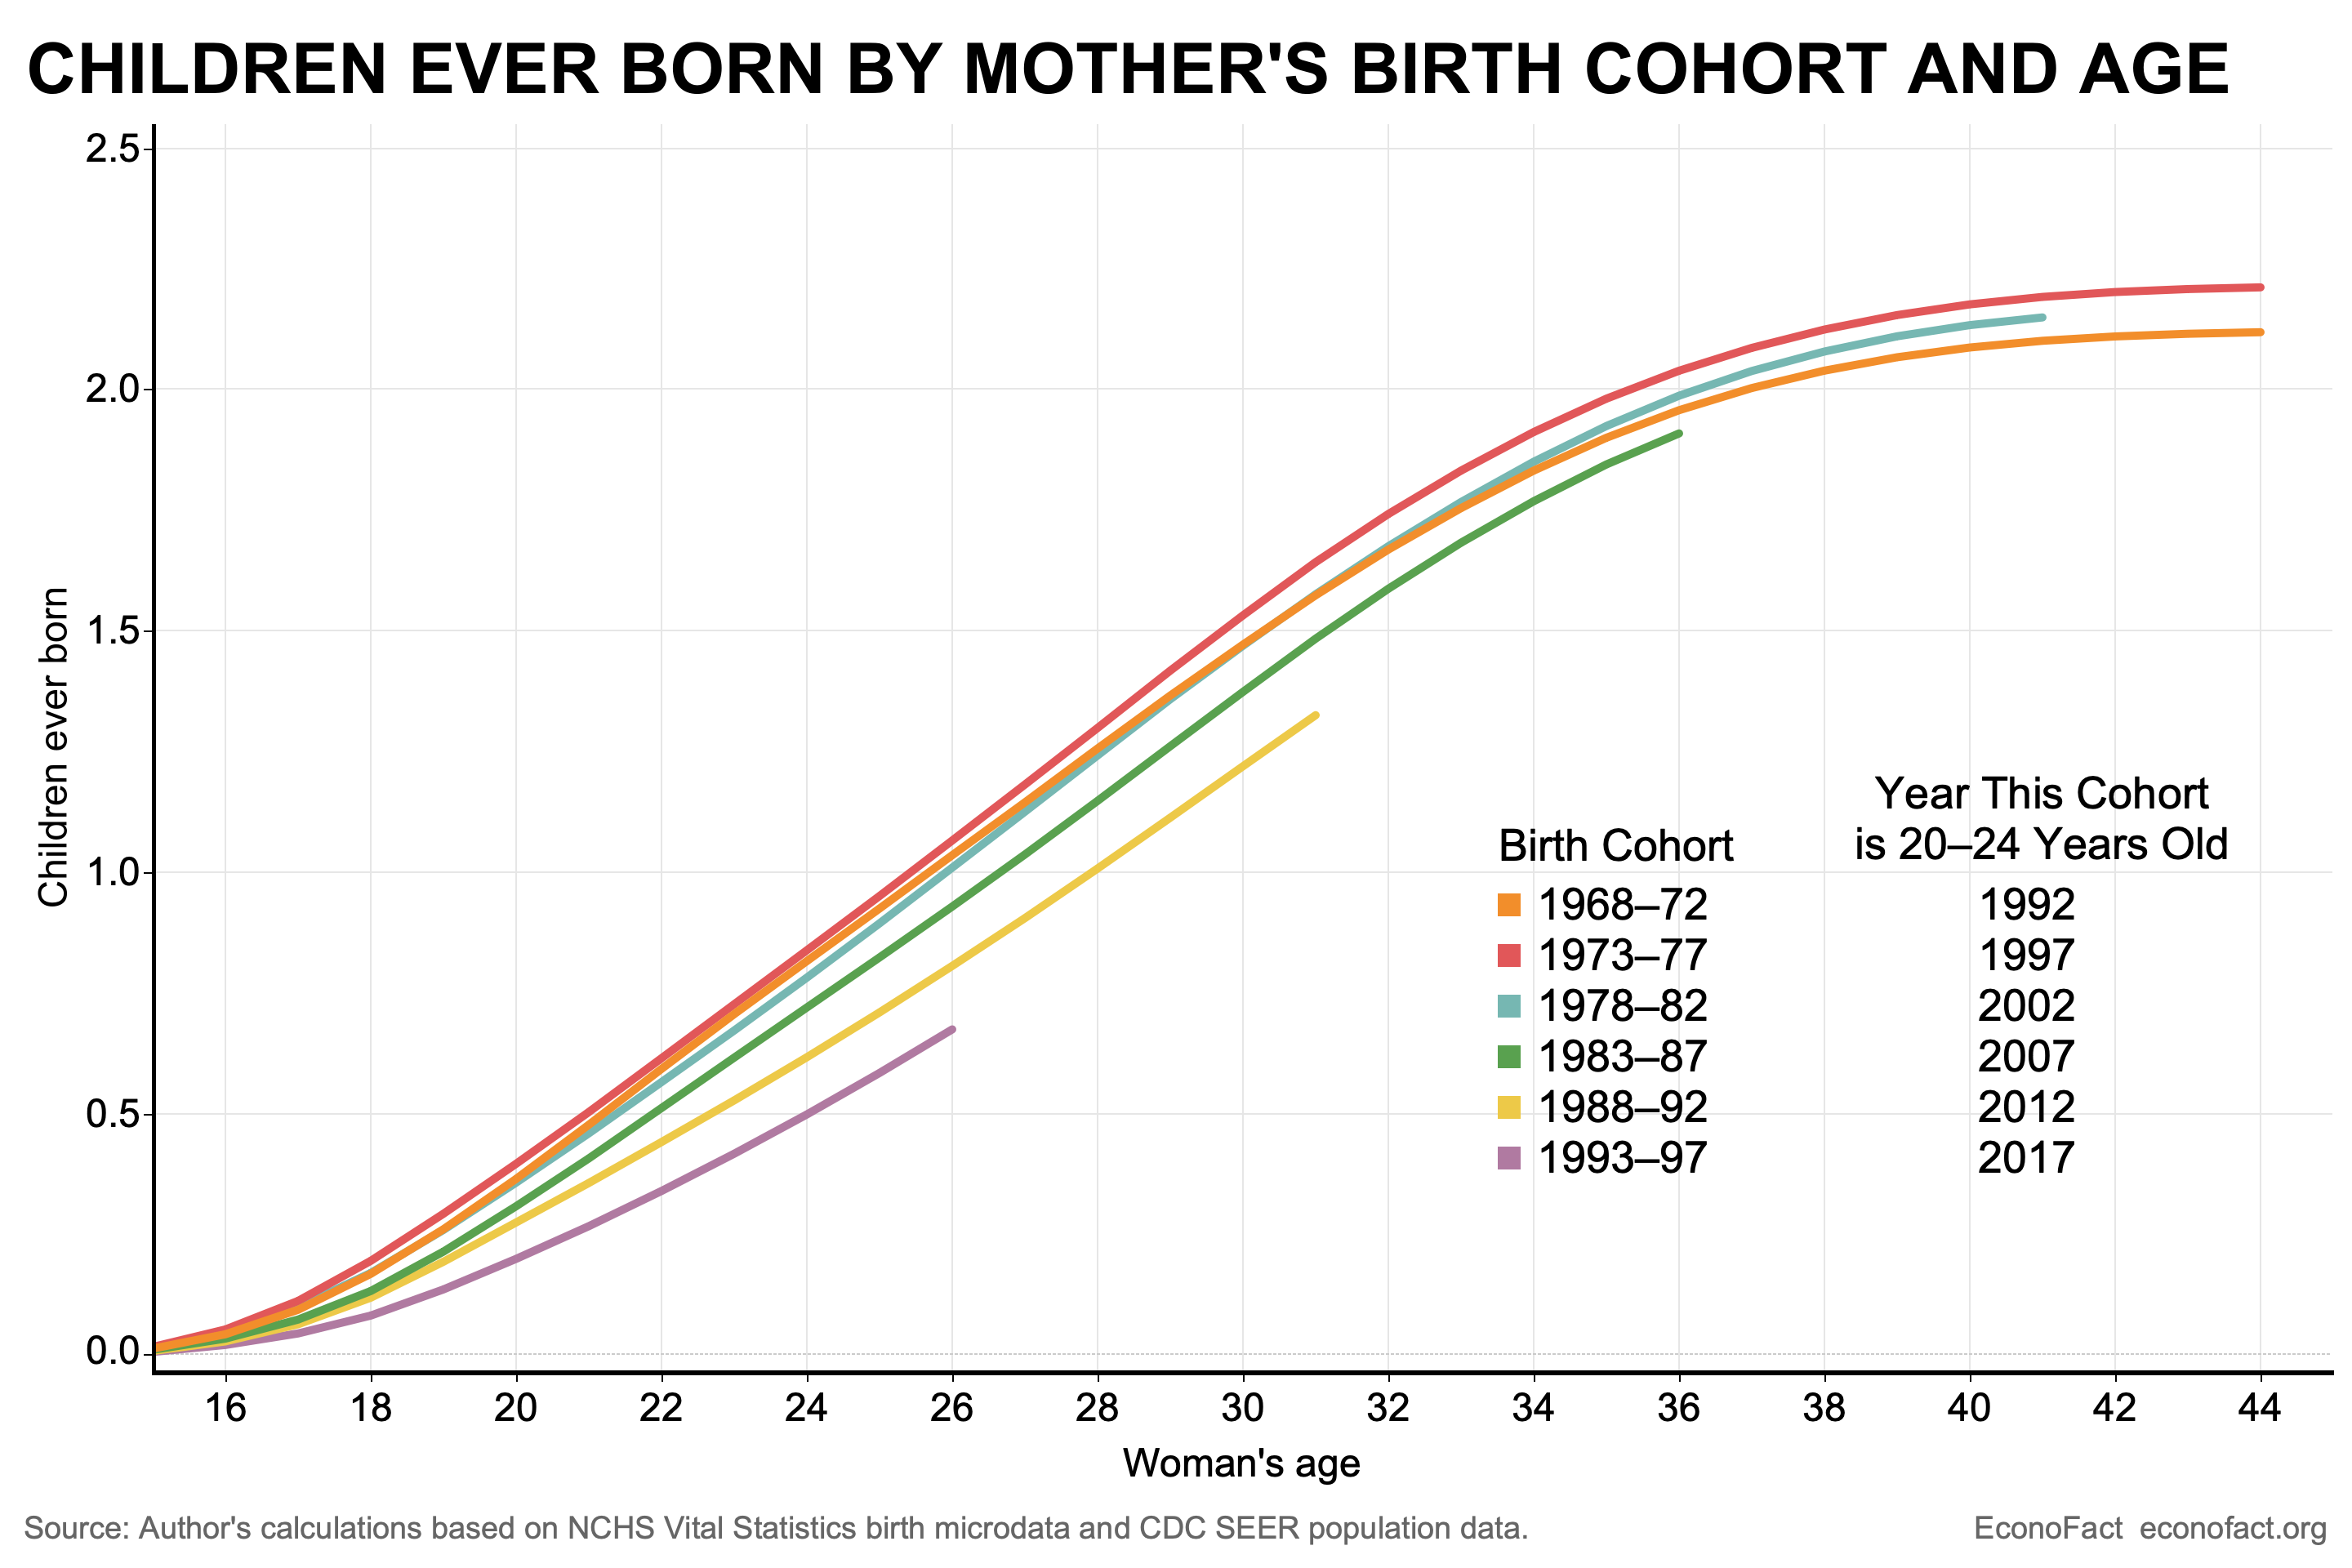 Women who were born in the windows 1968 to 1972, 1973 to 1977, and 1978 to1982 all had similar childbearing age profiles throughout their lives. Then, the cohort of women born between 1983 and 1987 had fewer children throughout their 20s and their 30s. The next two five-year birth cohorts of women (born between 1988 and 1997) have fewer children than earlier cohorts.